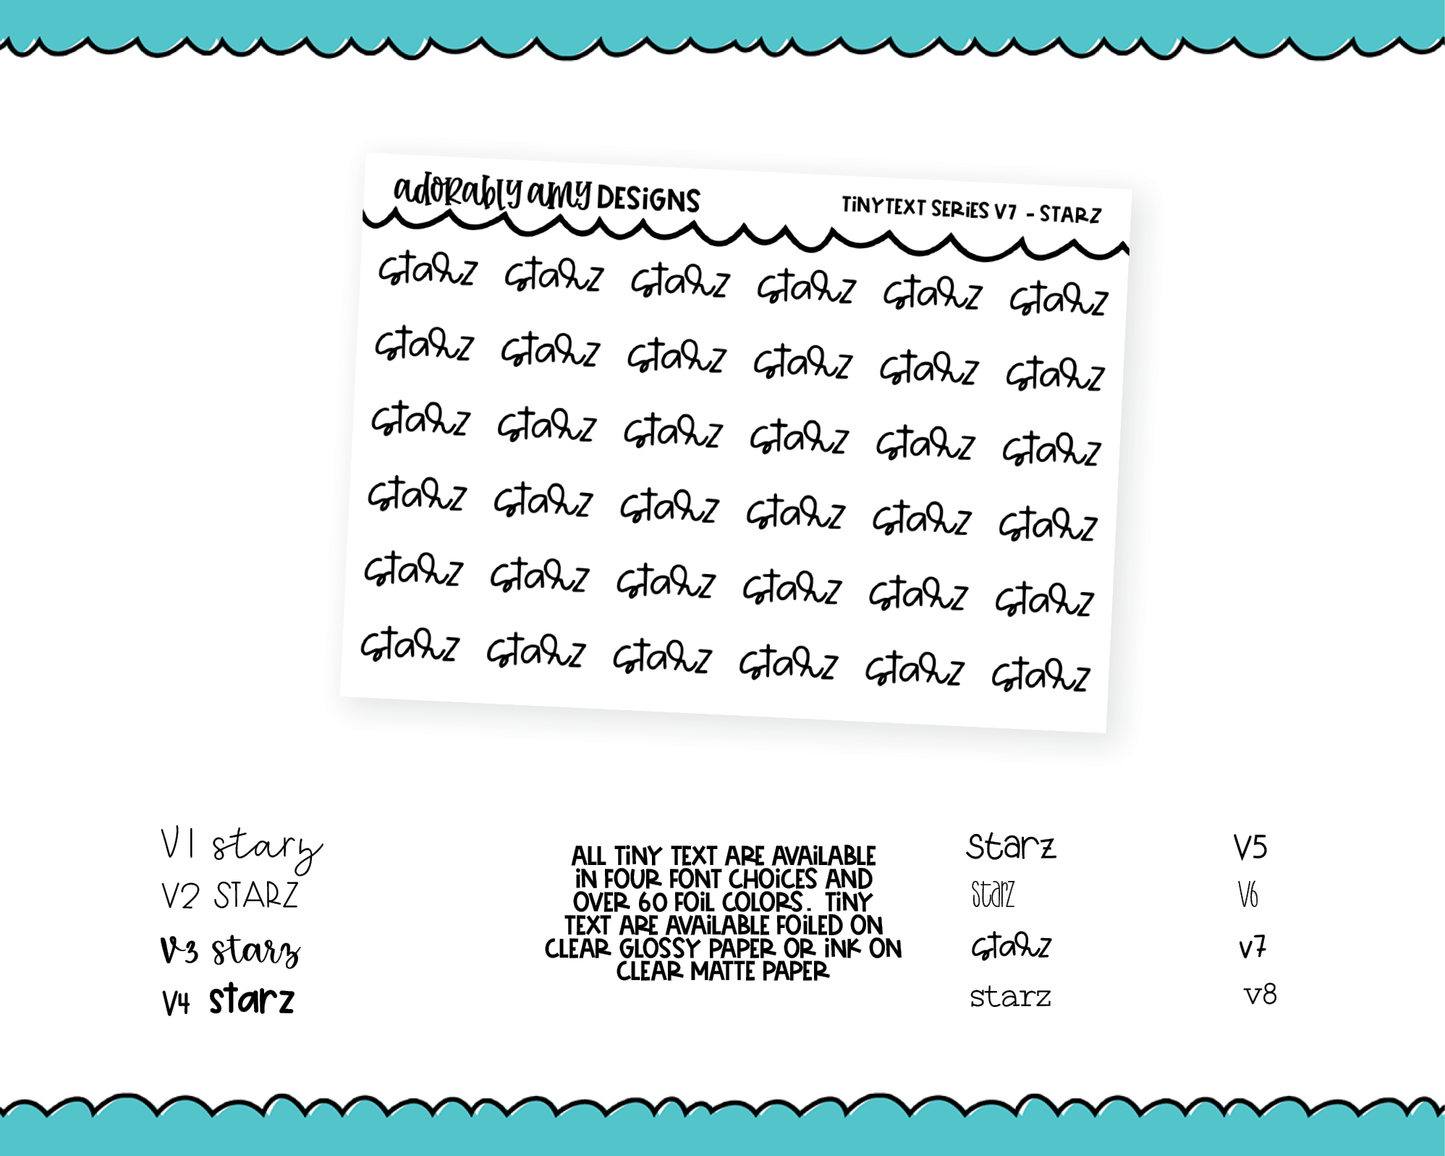 Foiled Tiny Text Series - Starz Checklist Size Planner Stickers for any Planner or Insert